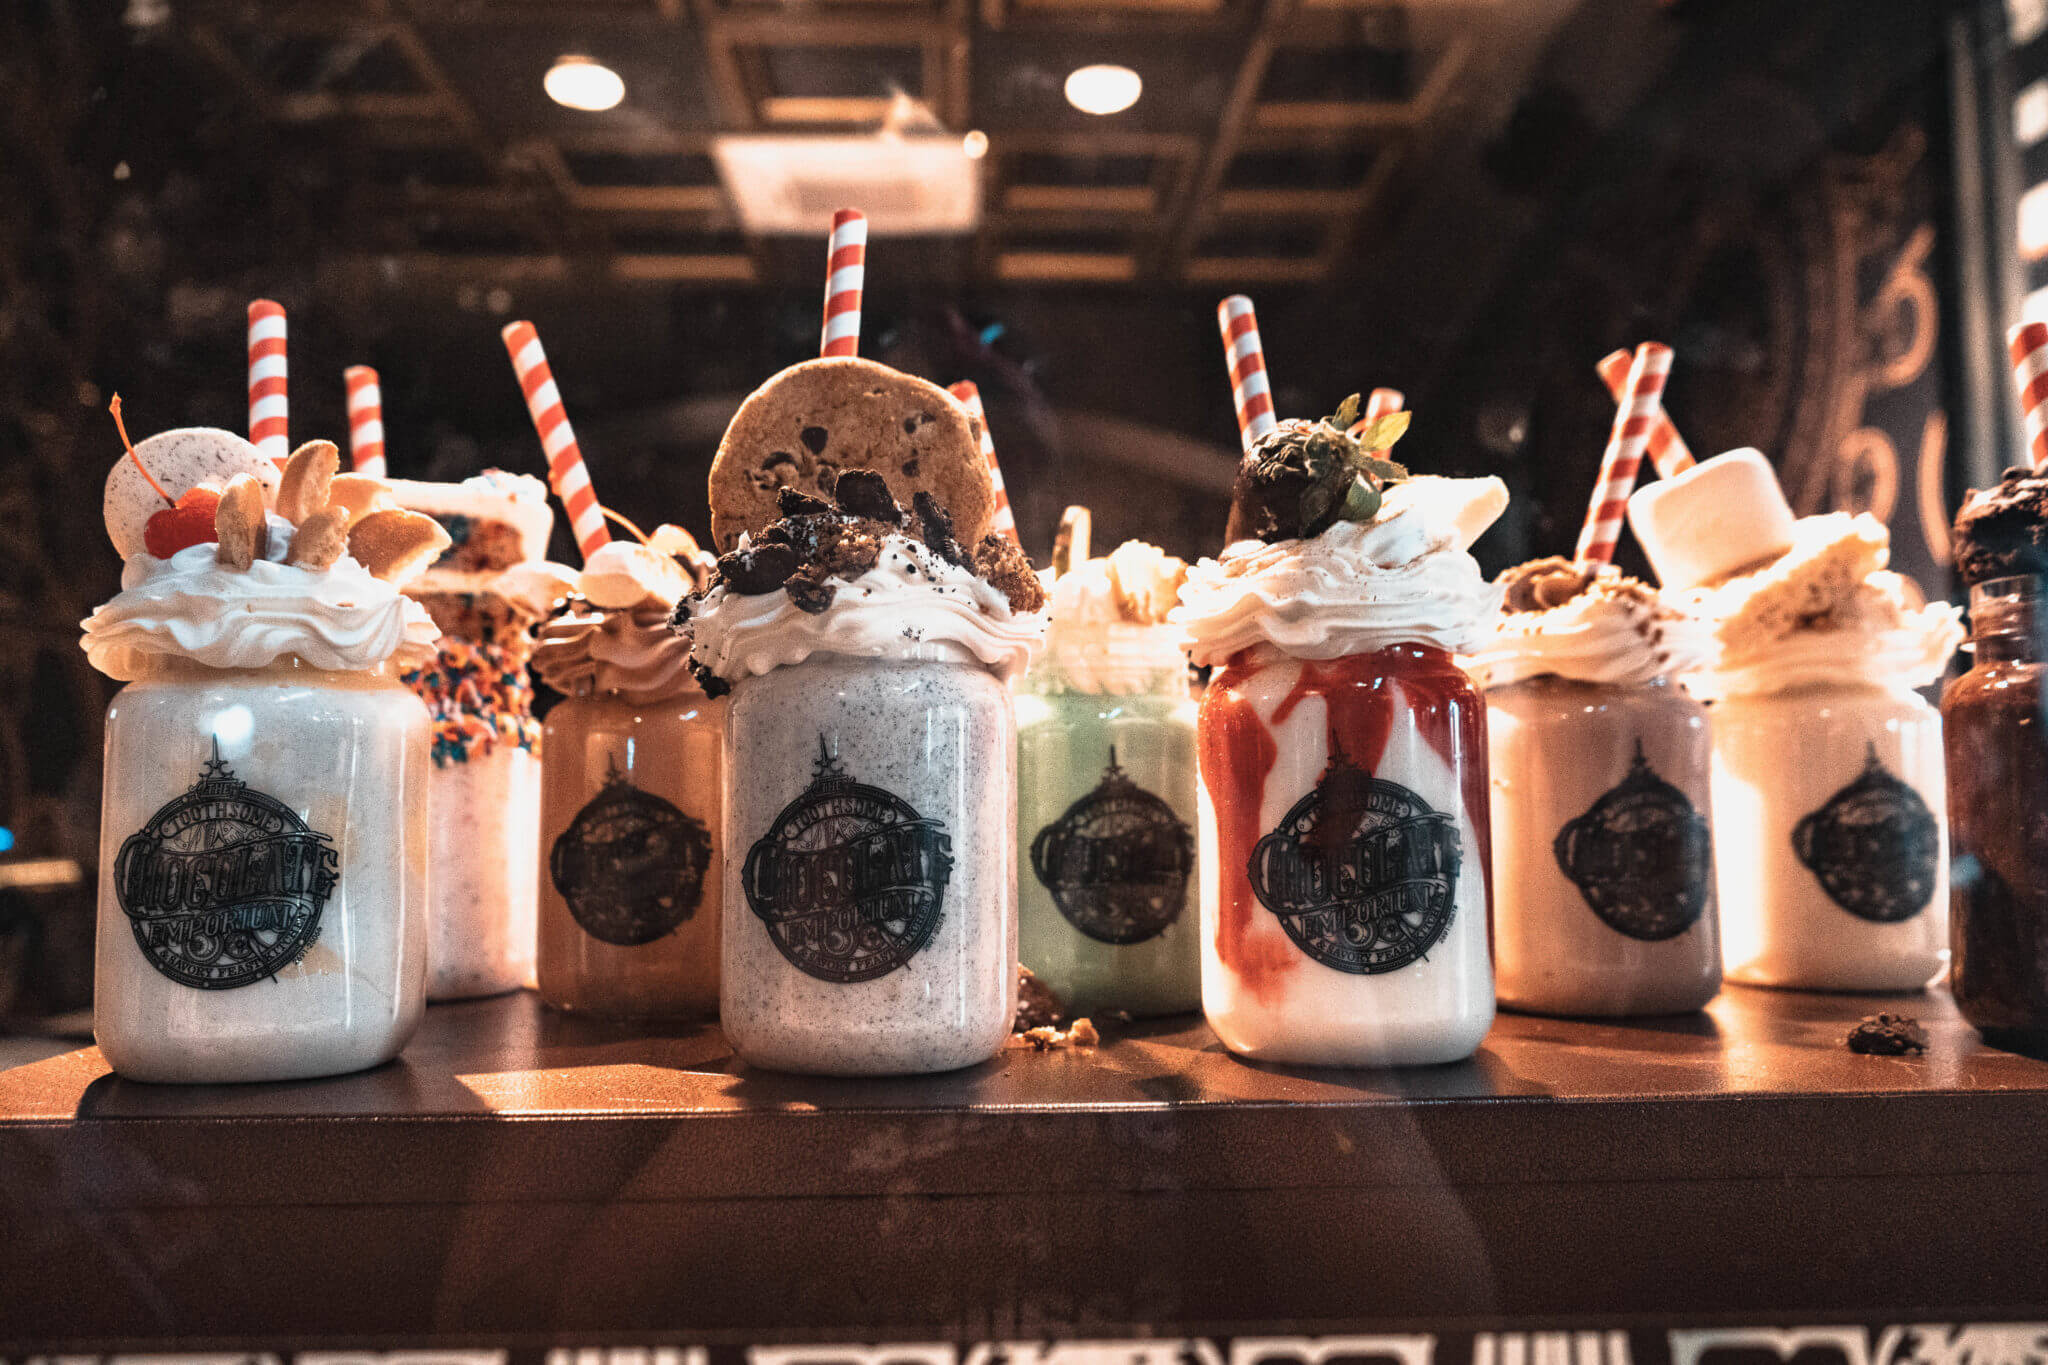 Display of chocolate, red velvet, and marshmallow milkshakes from Toothsome Chocolate Emporium and Savory Feast Kitchen in Universal Studios CityWalk